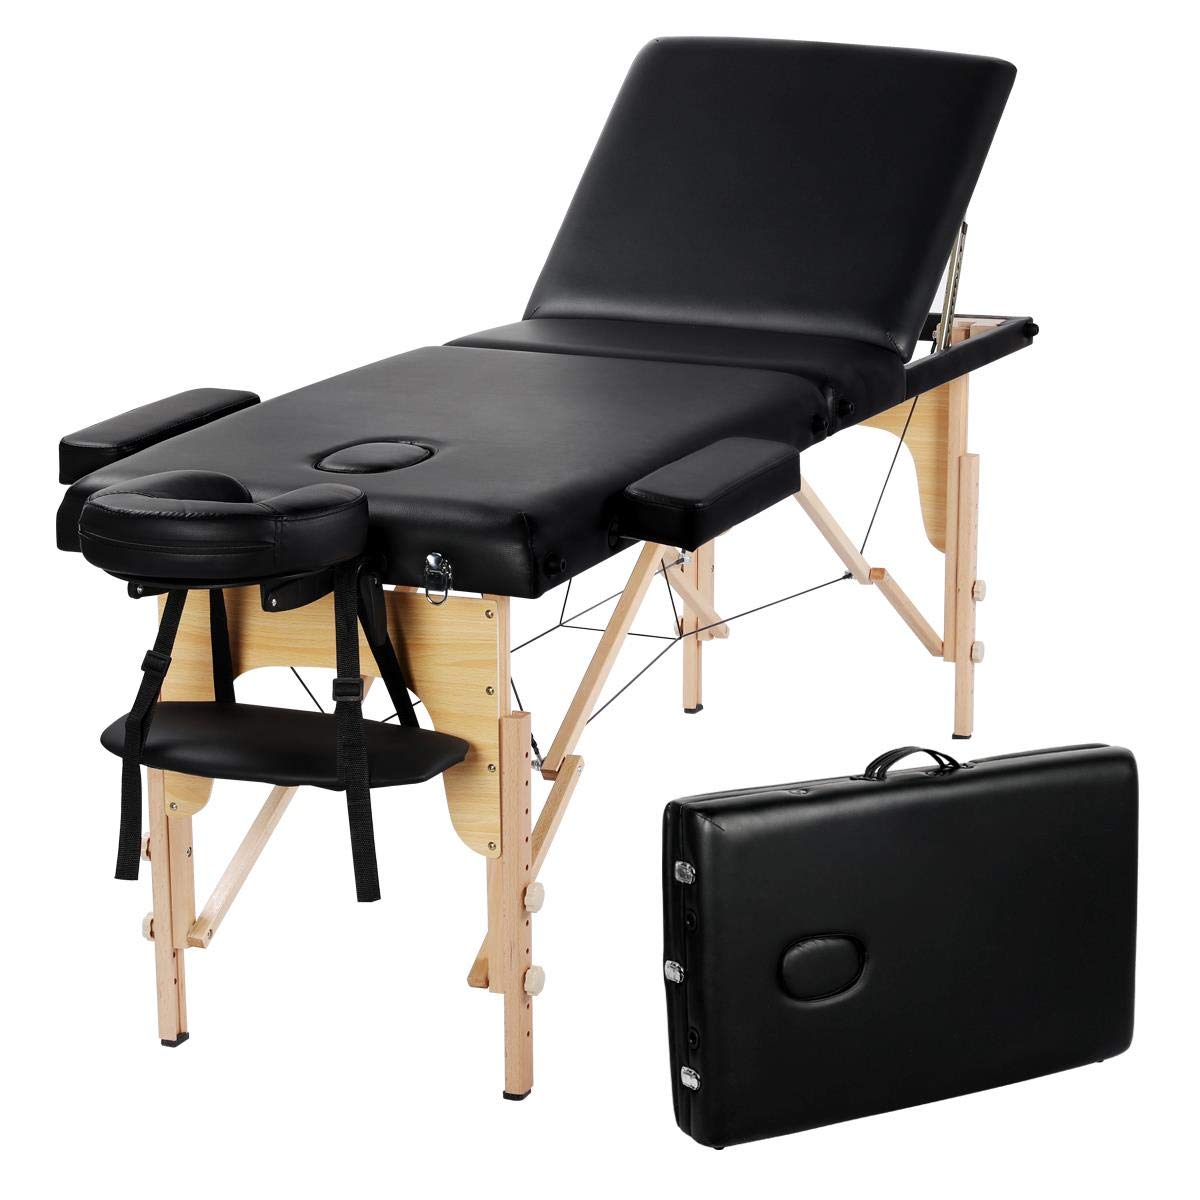  2. Yaheetech Massage and Therapy Table 